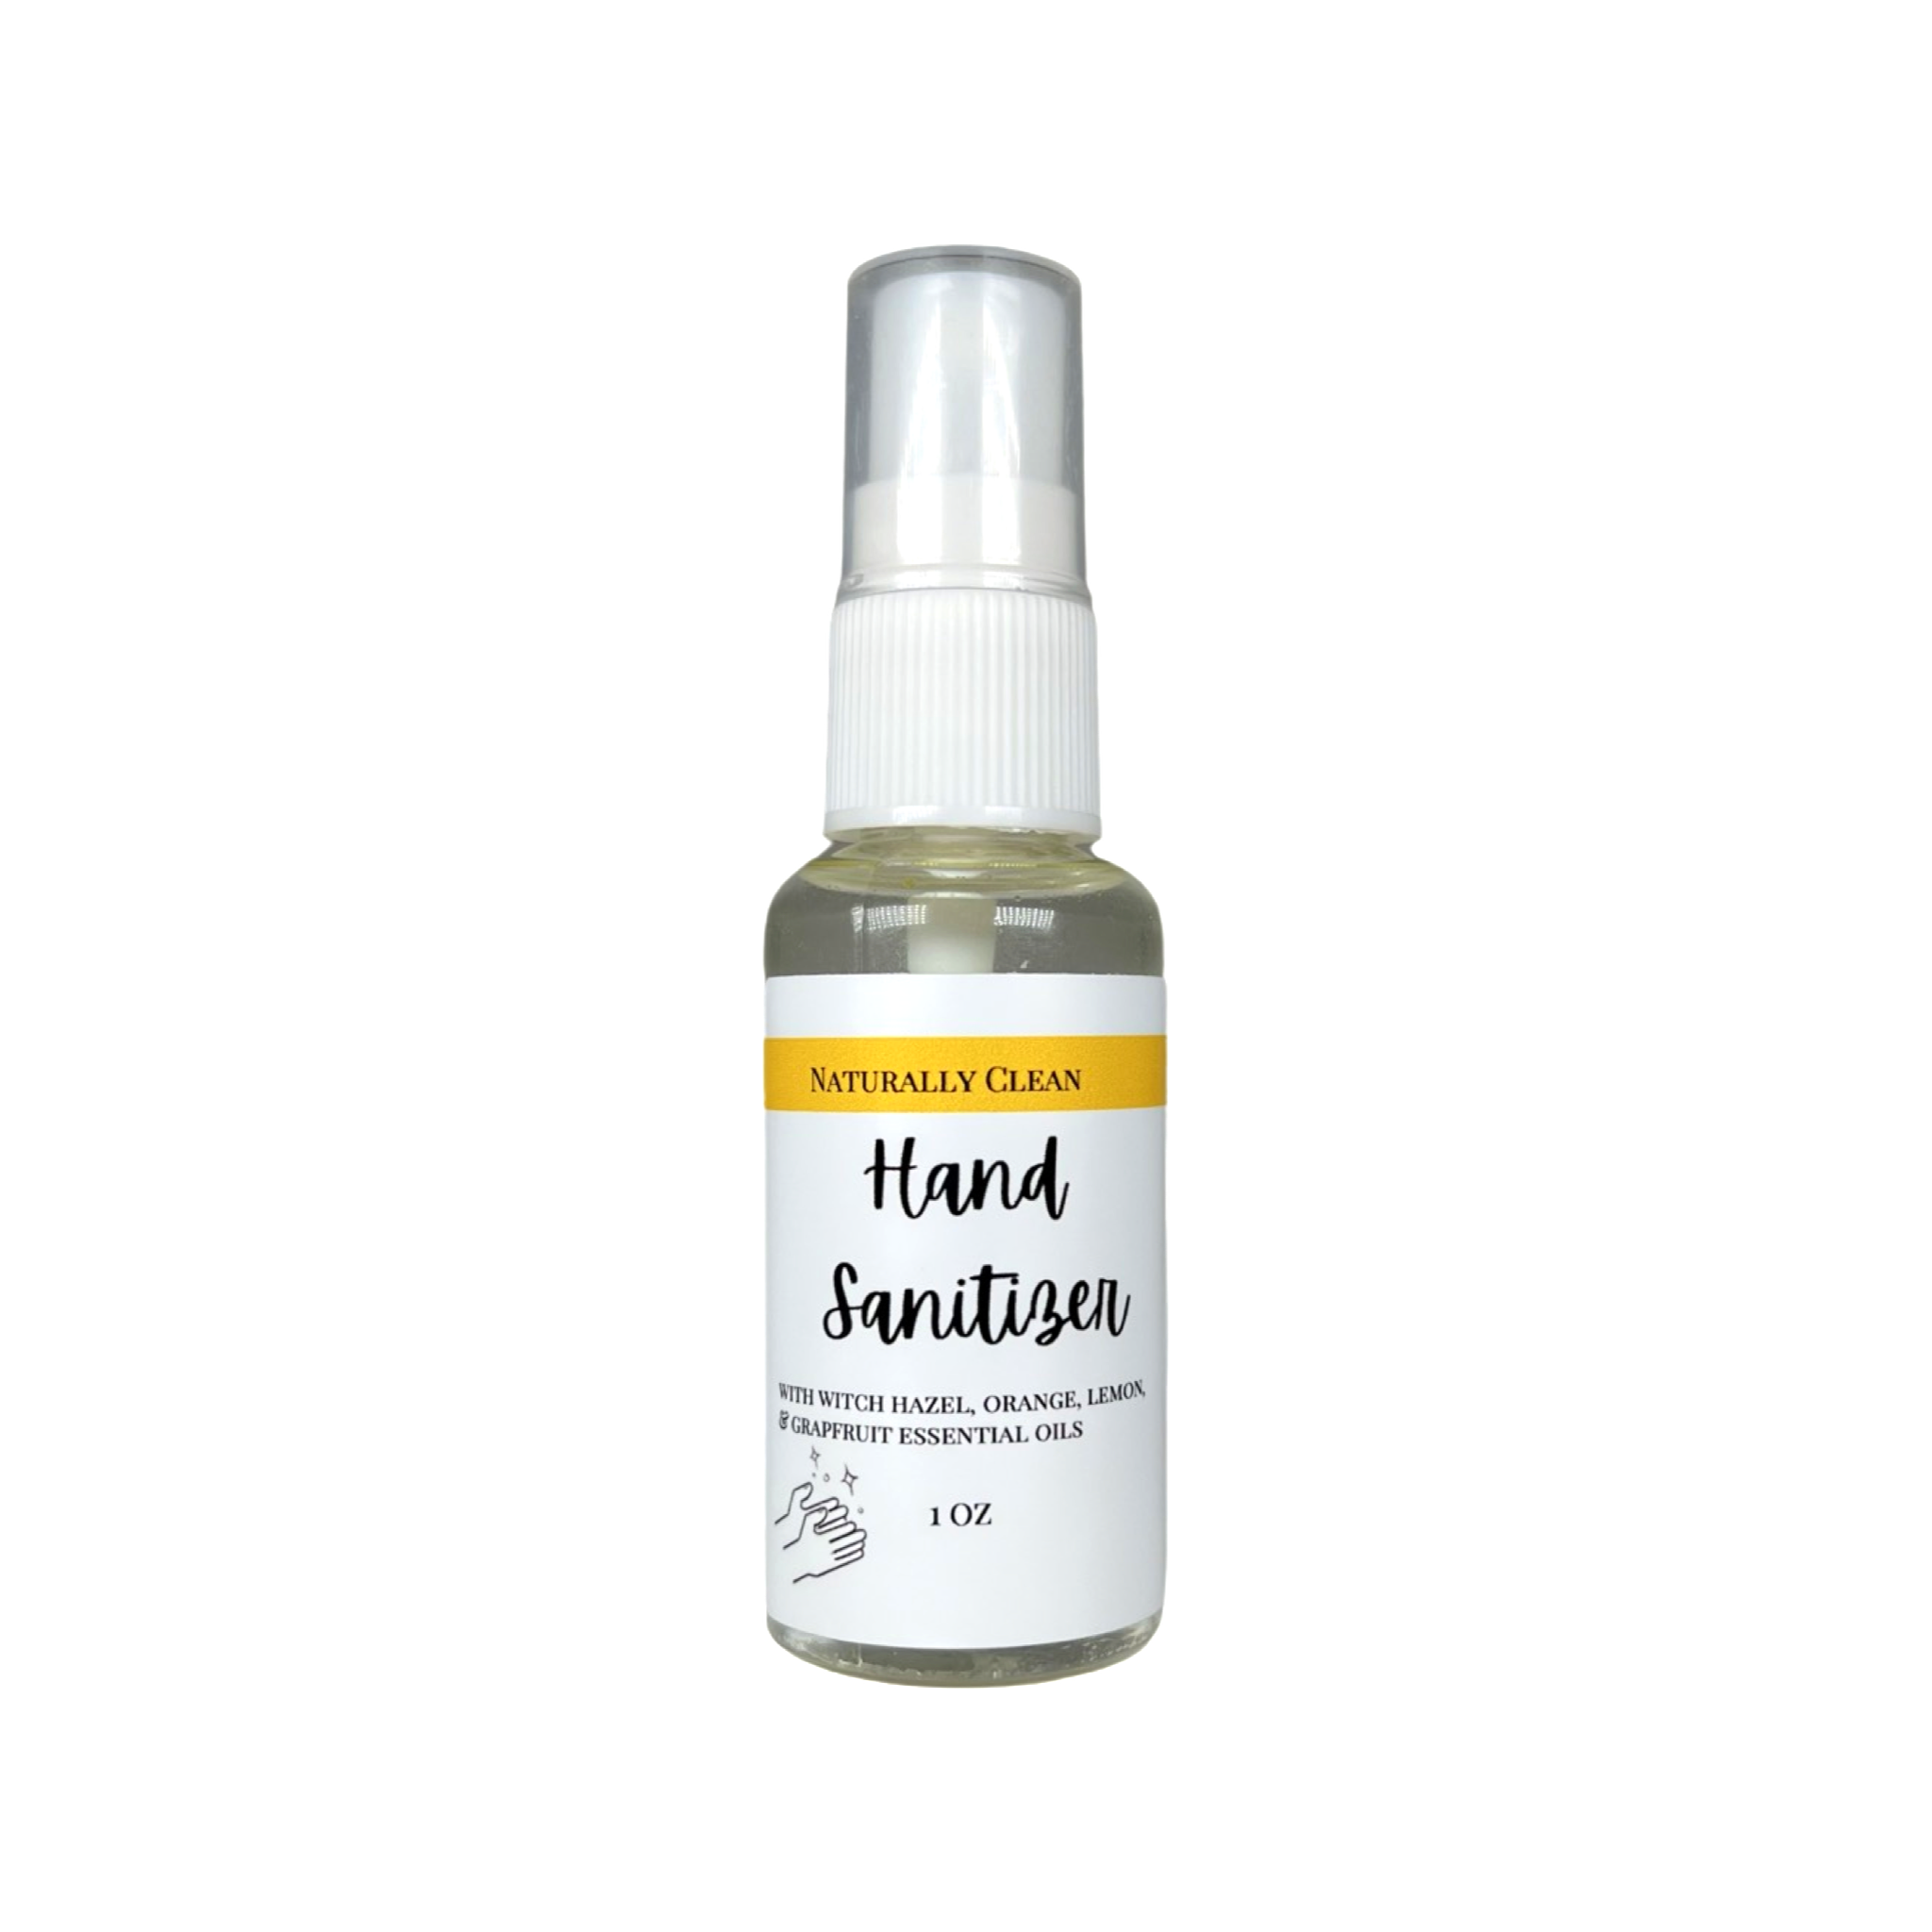 Hand Sanitizer-Naturally Clean 1oz